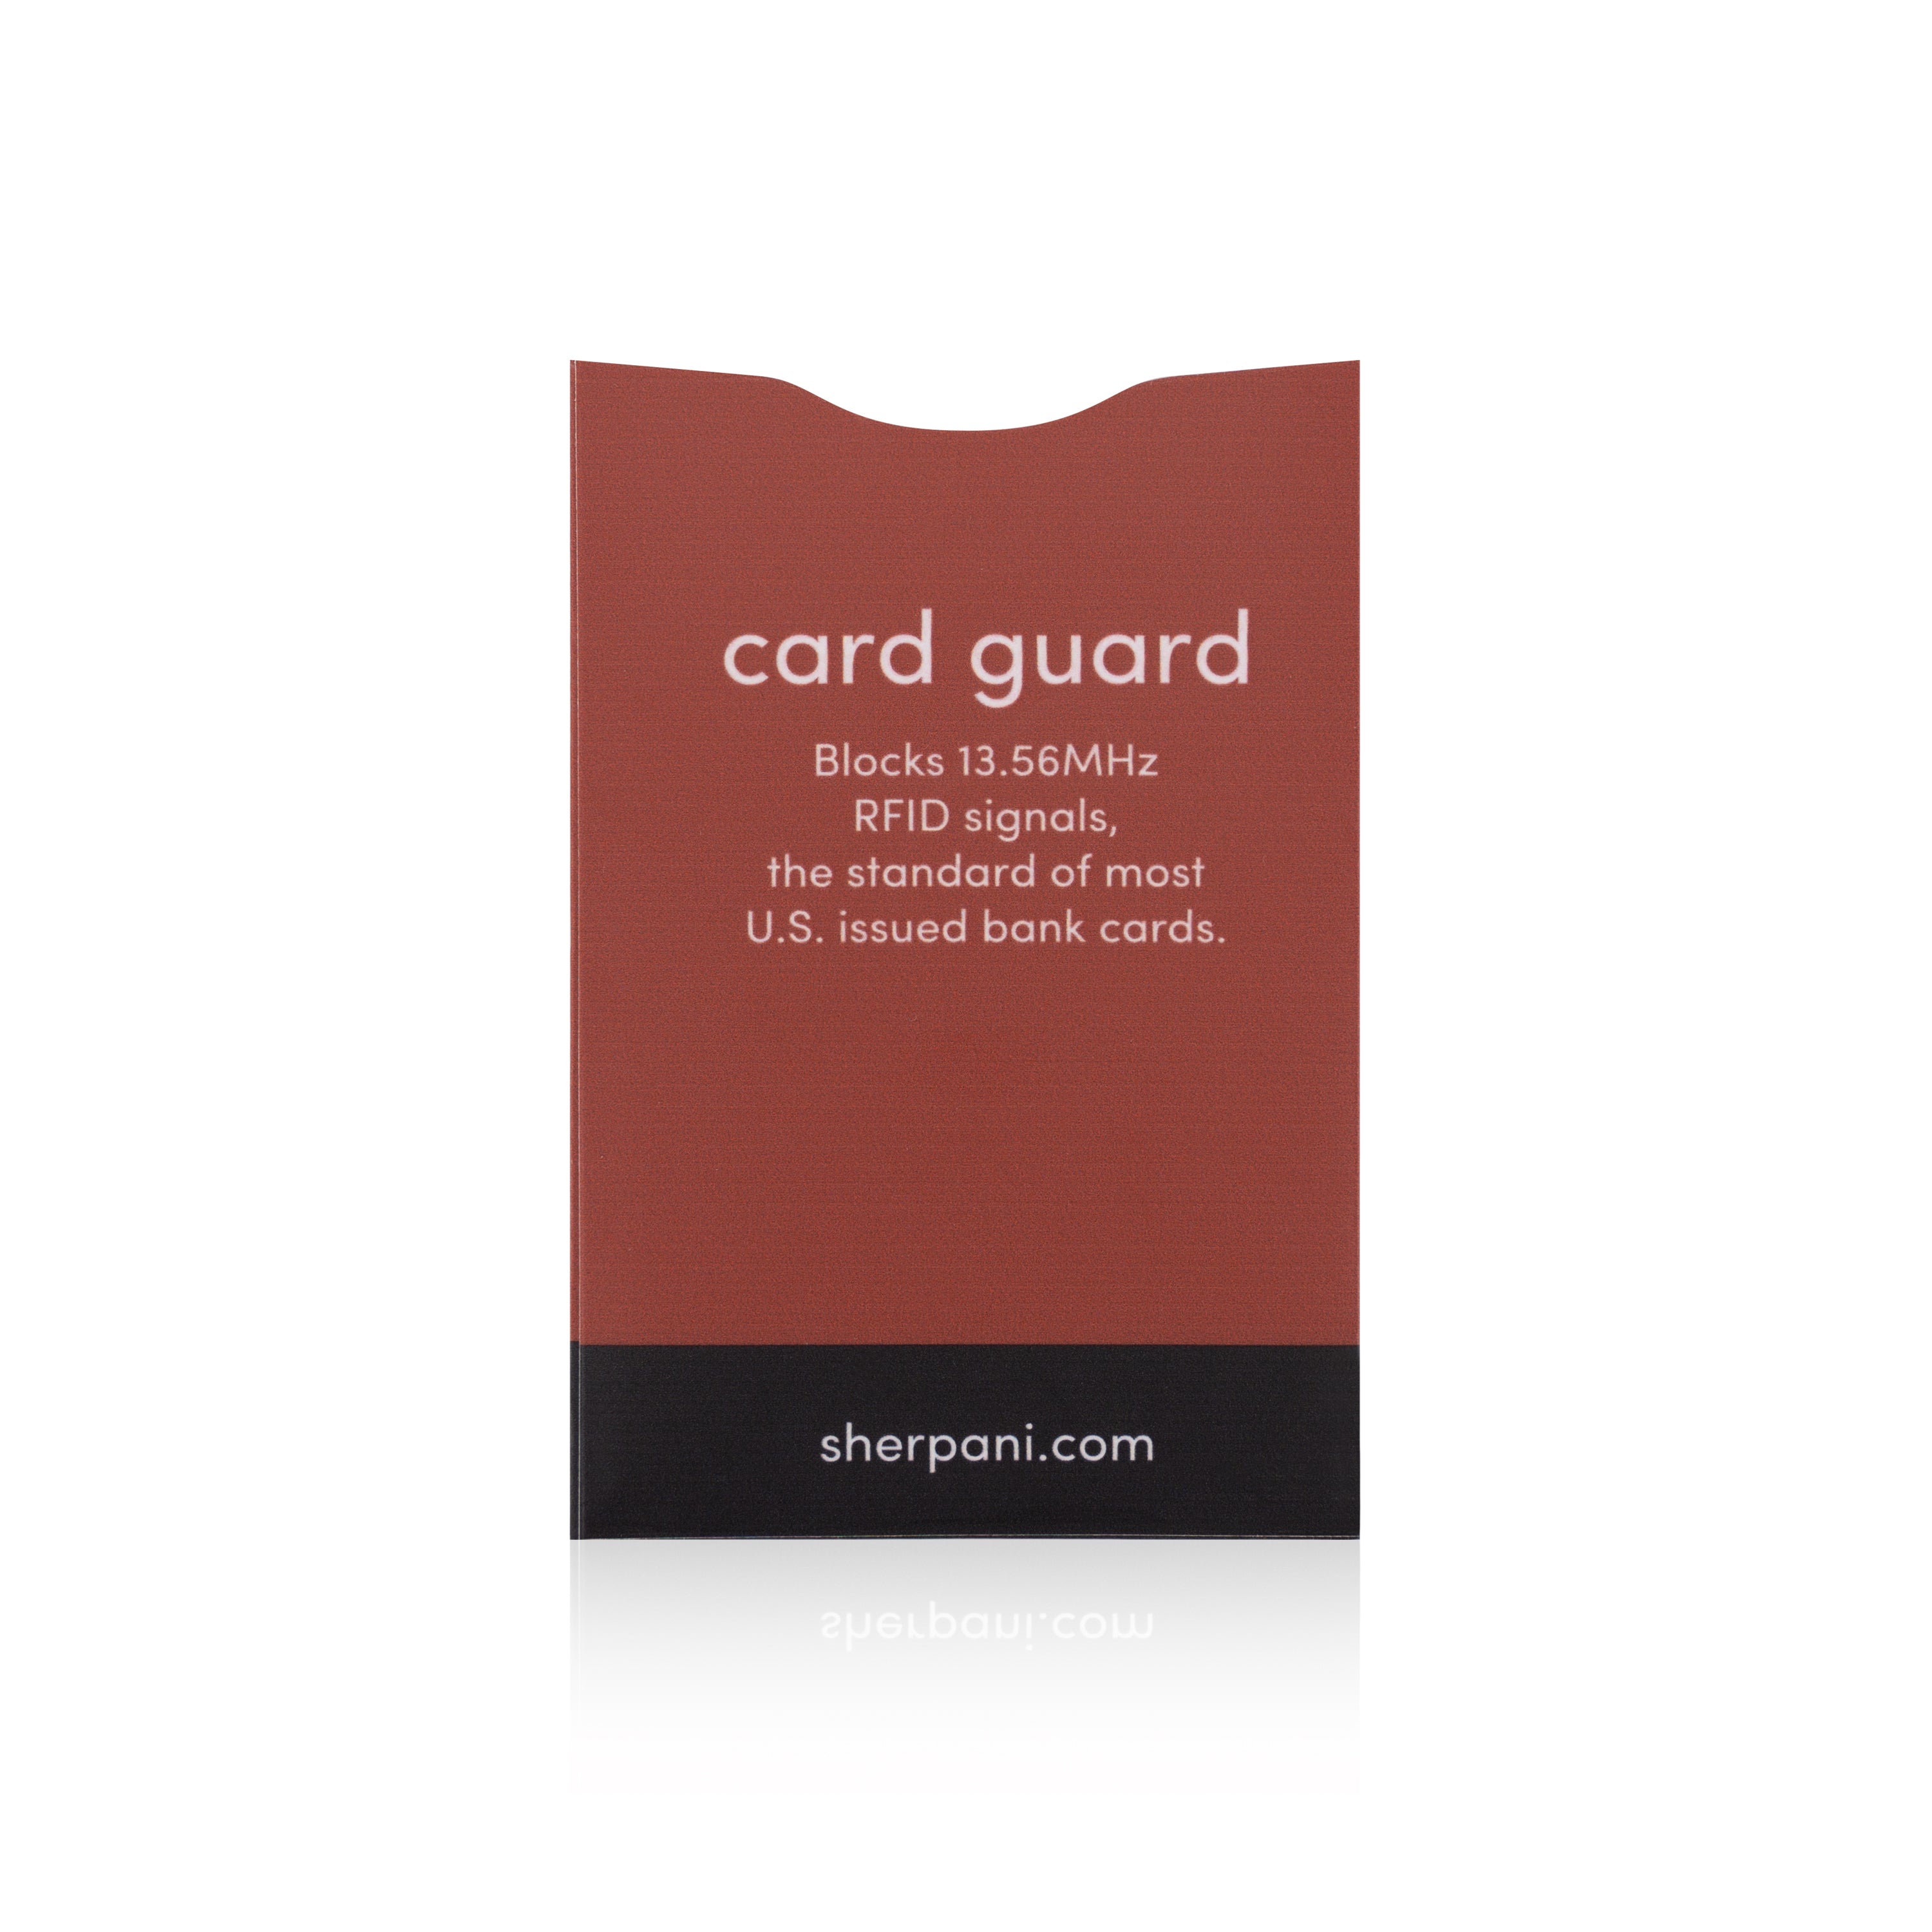 Back view of card guard in Cider. The back reads "Blocks 13.56MHz RFID signals, the standard of most U.S. issued bank cards."